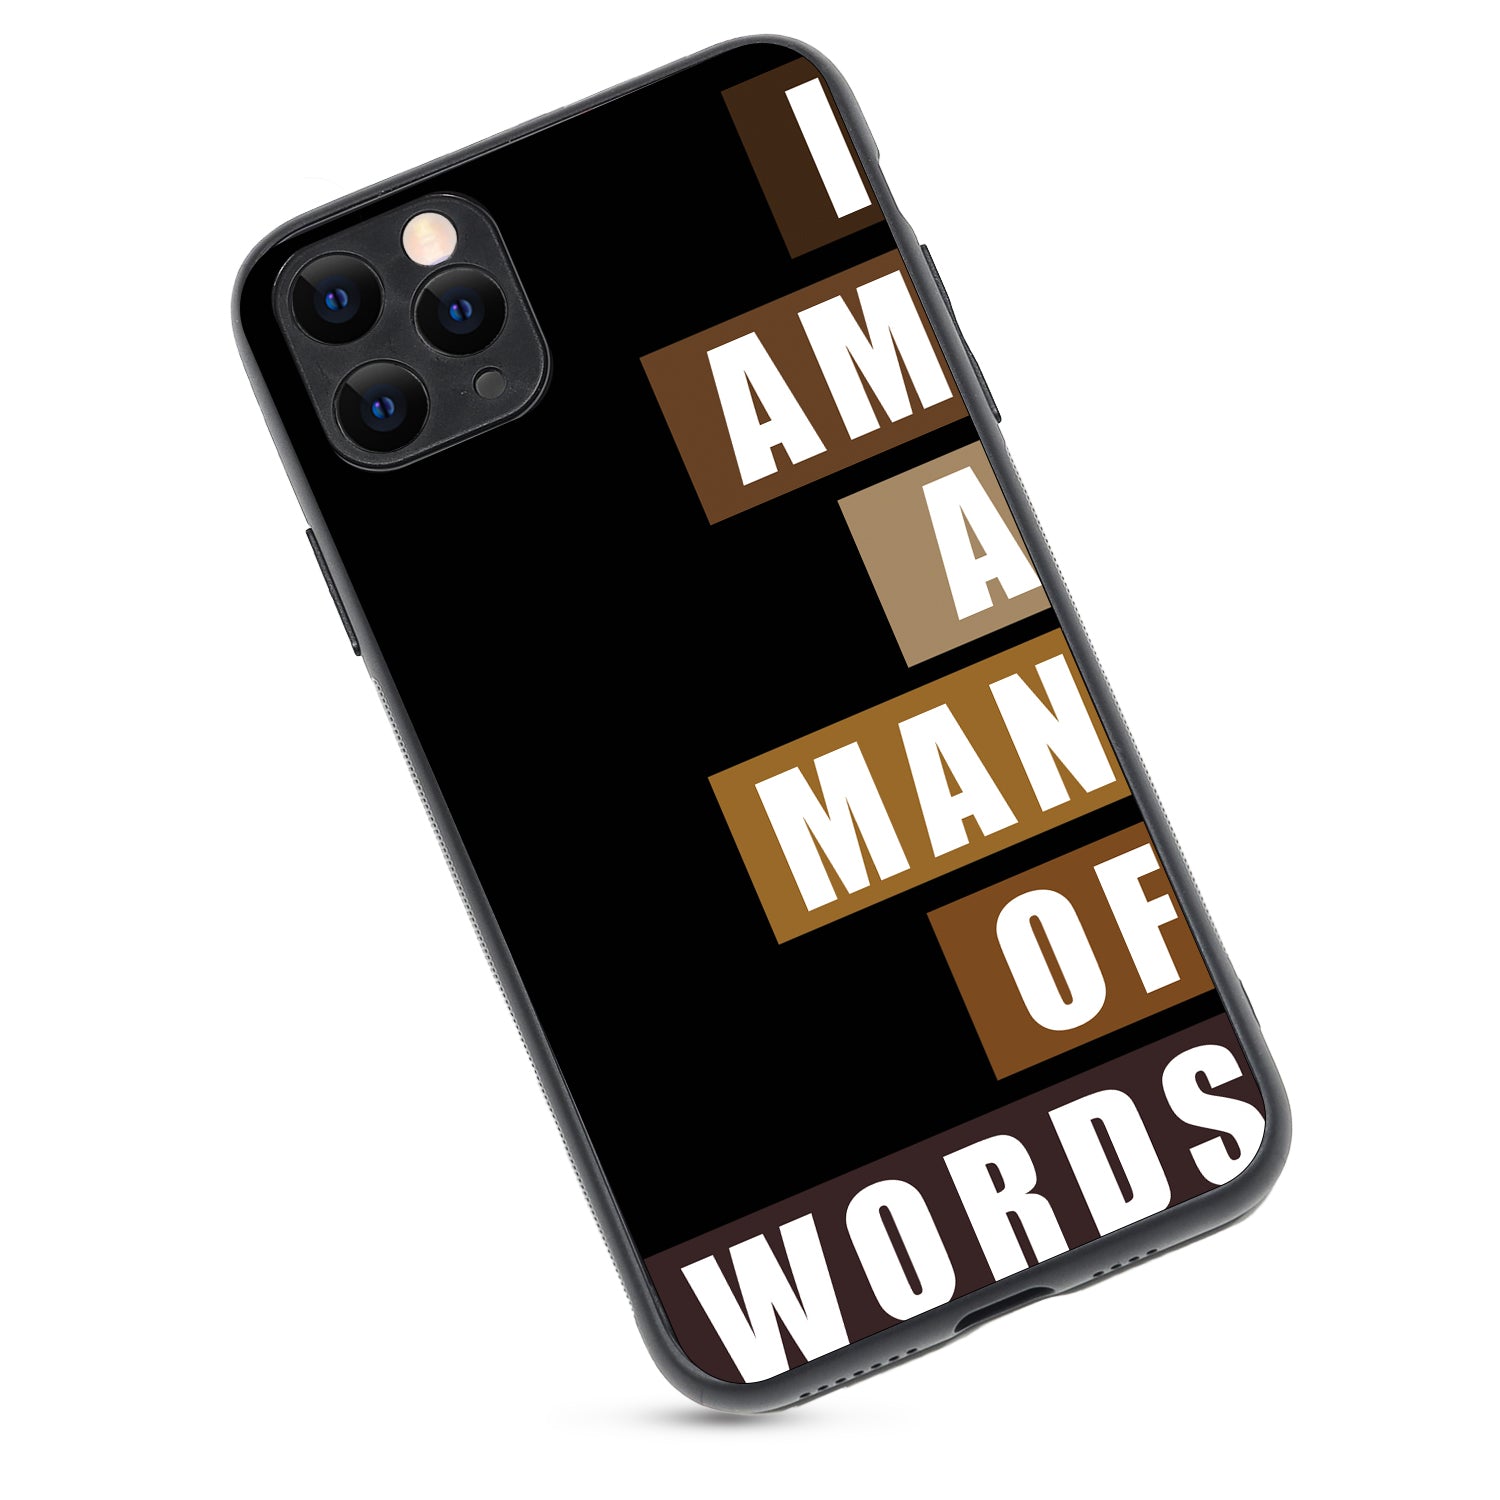 I Am A Man Of Words Motivational Quotes iPhone 11 Pro Max Case